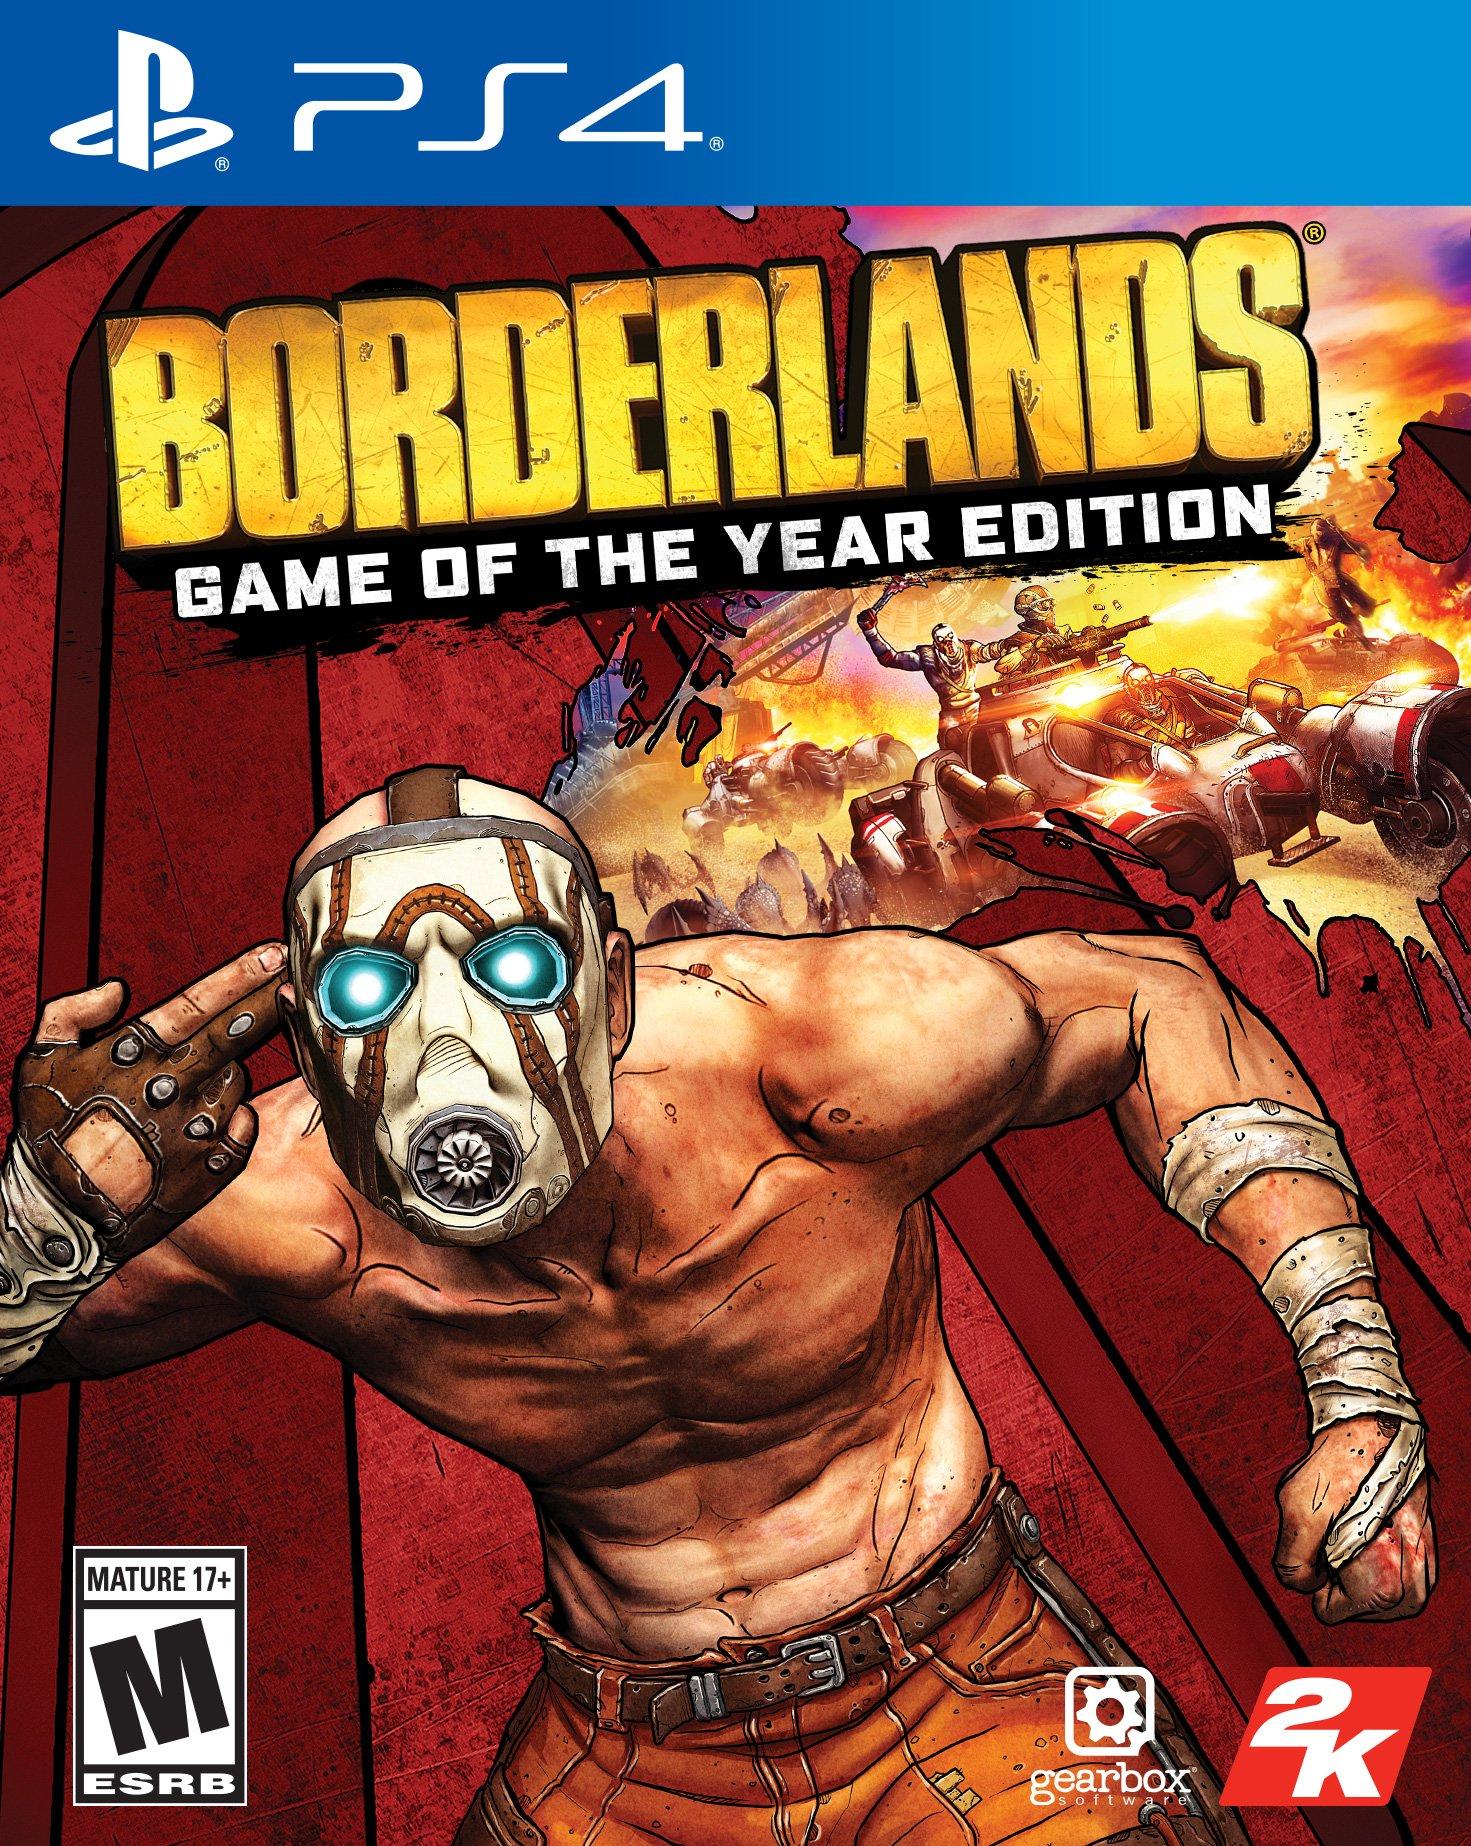 håndtag aborre at styre Borderlands: Game of the Year Edition - PlayStation 4 | PlayStation 4 |  GameStop